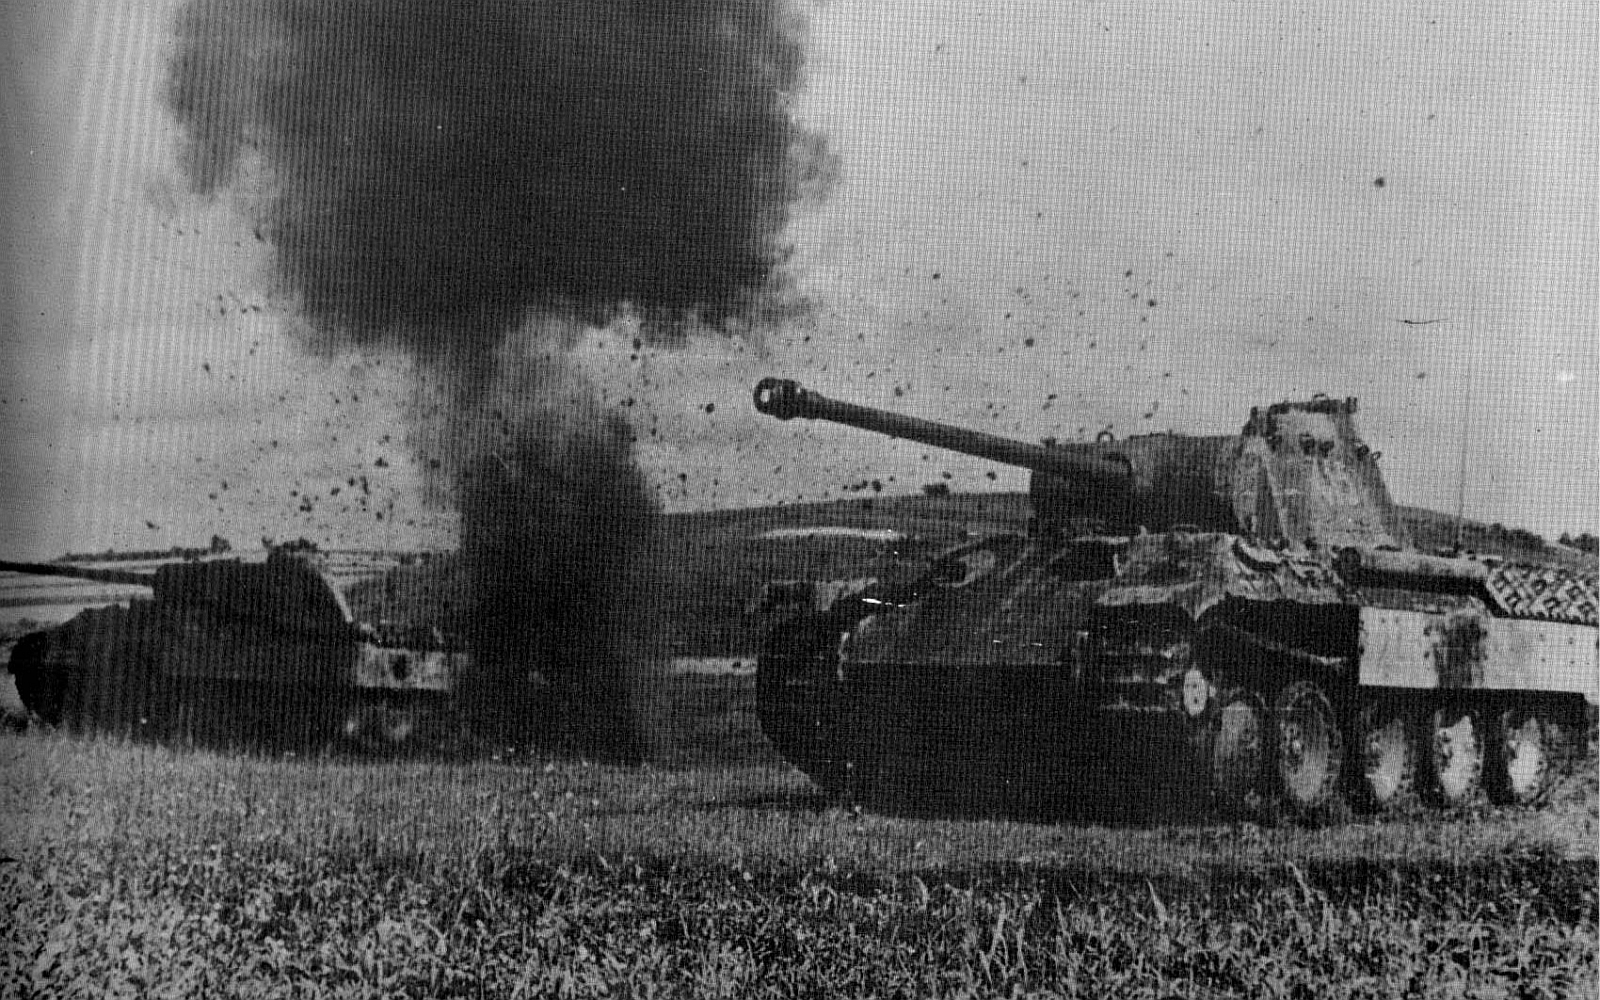 A pair of German Panther Advance thought multiple artillery strikes.